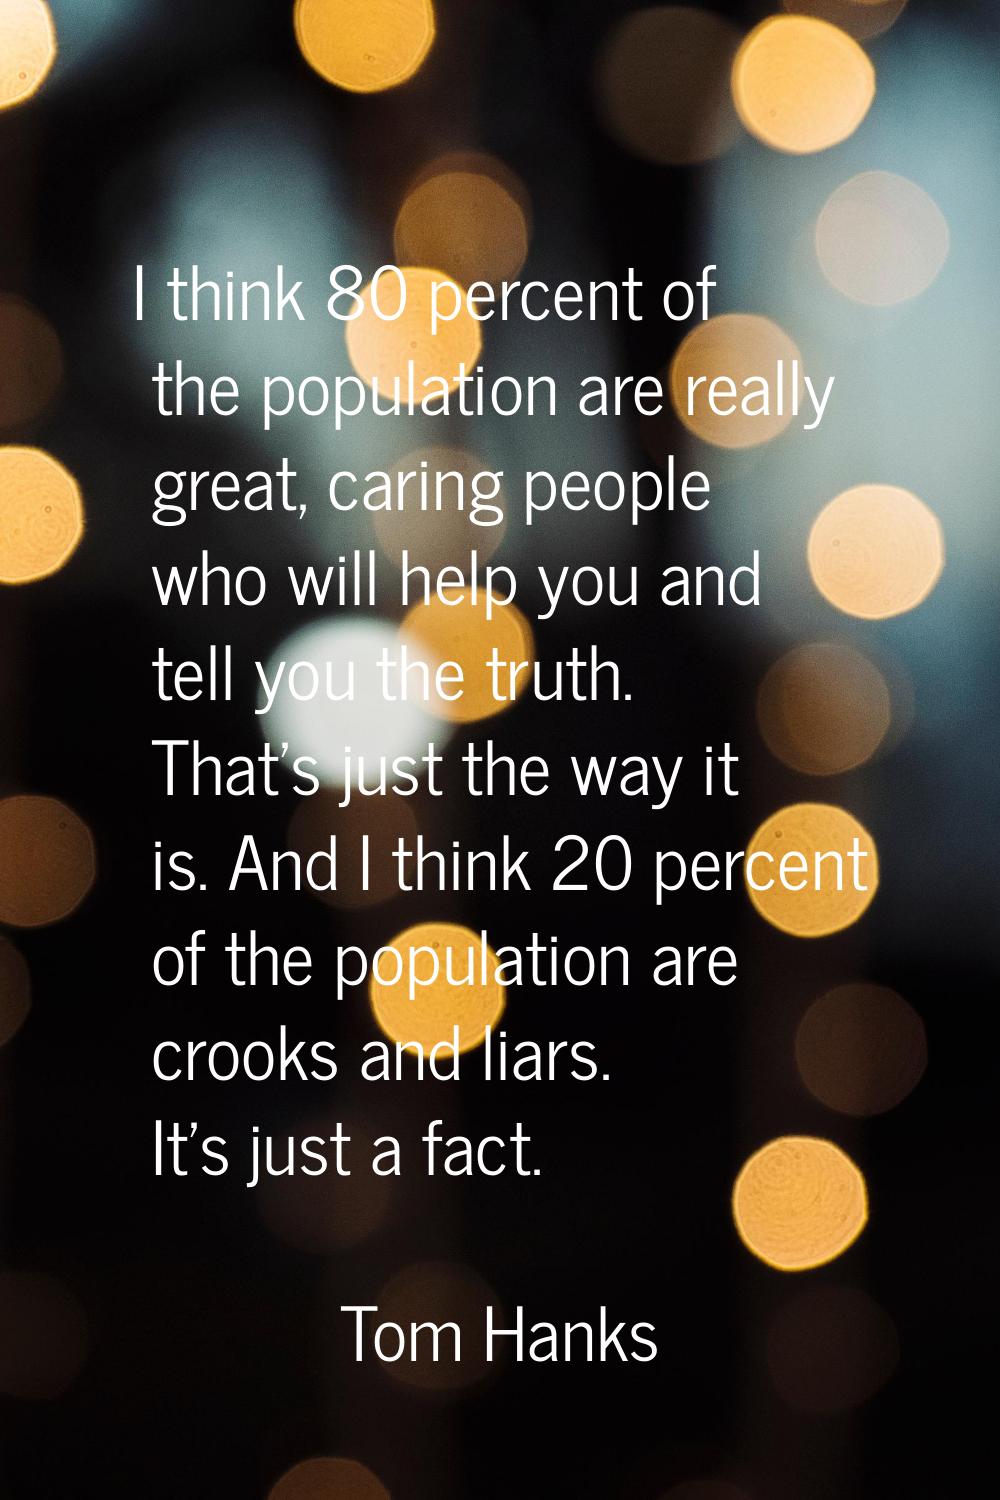 I think 80 percent of the population are really great, caring people who will help you and tell you